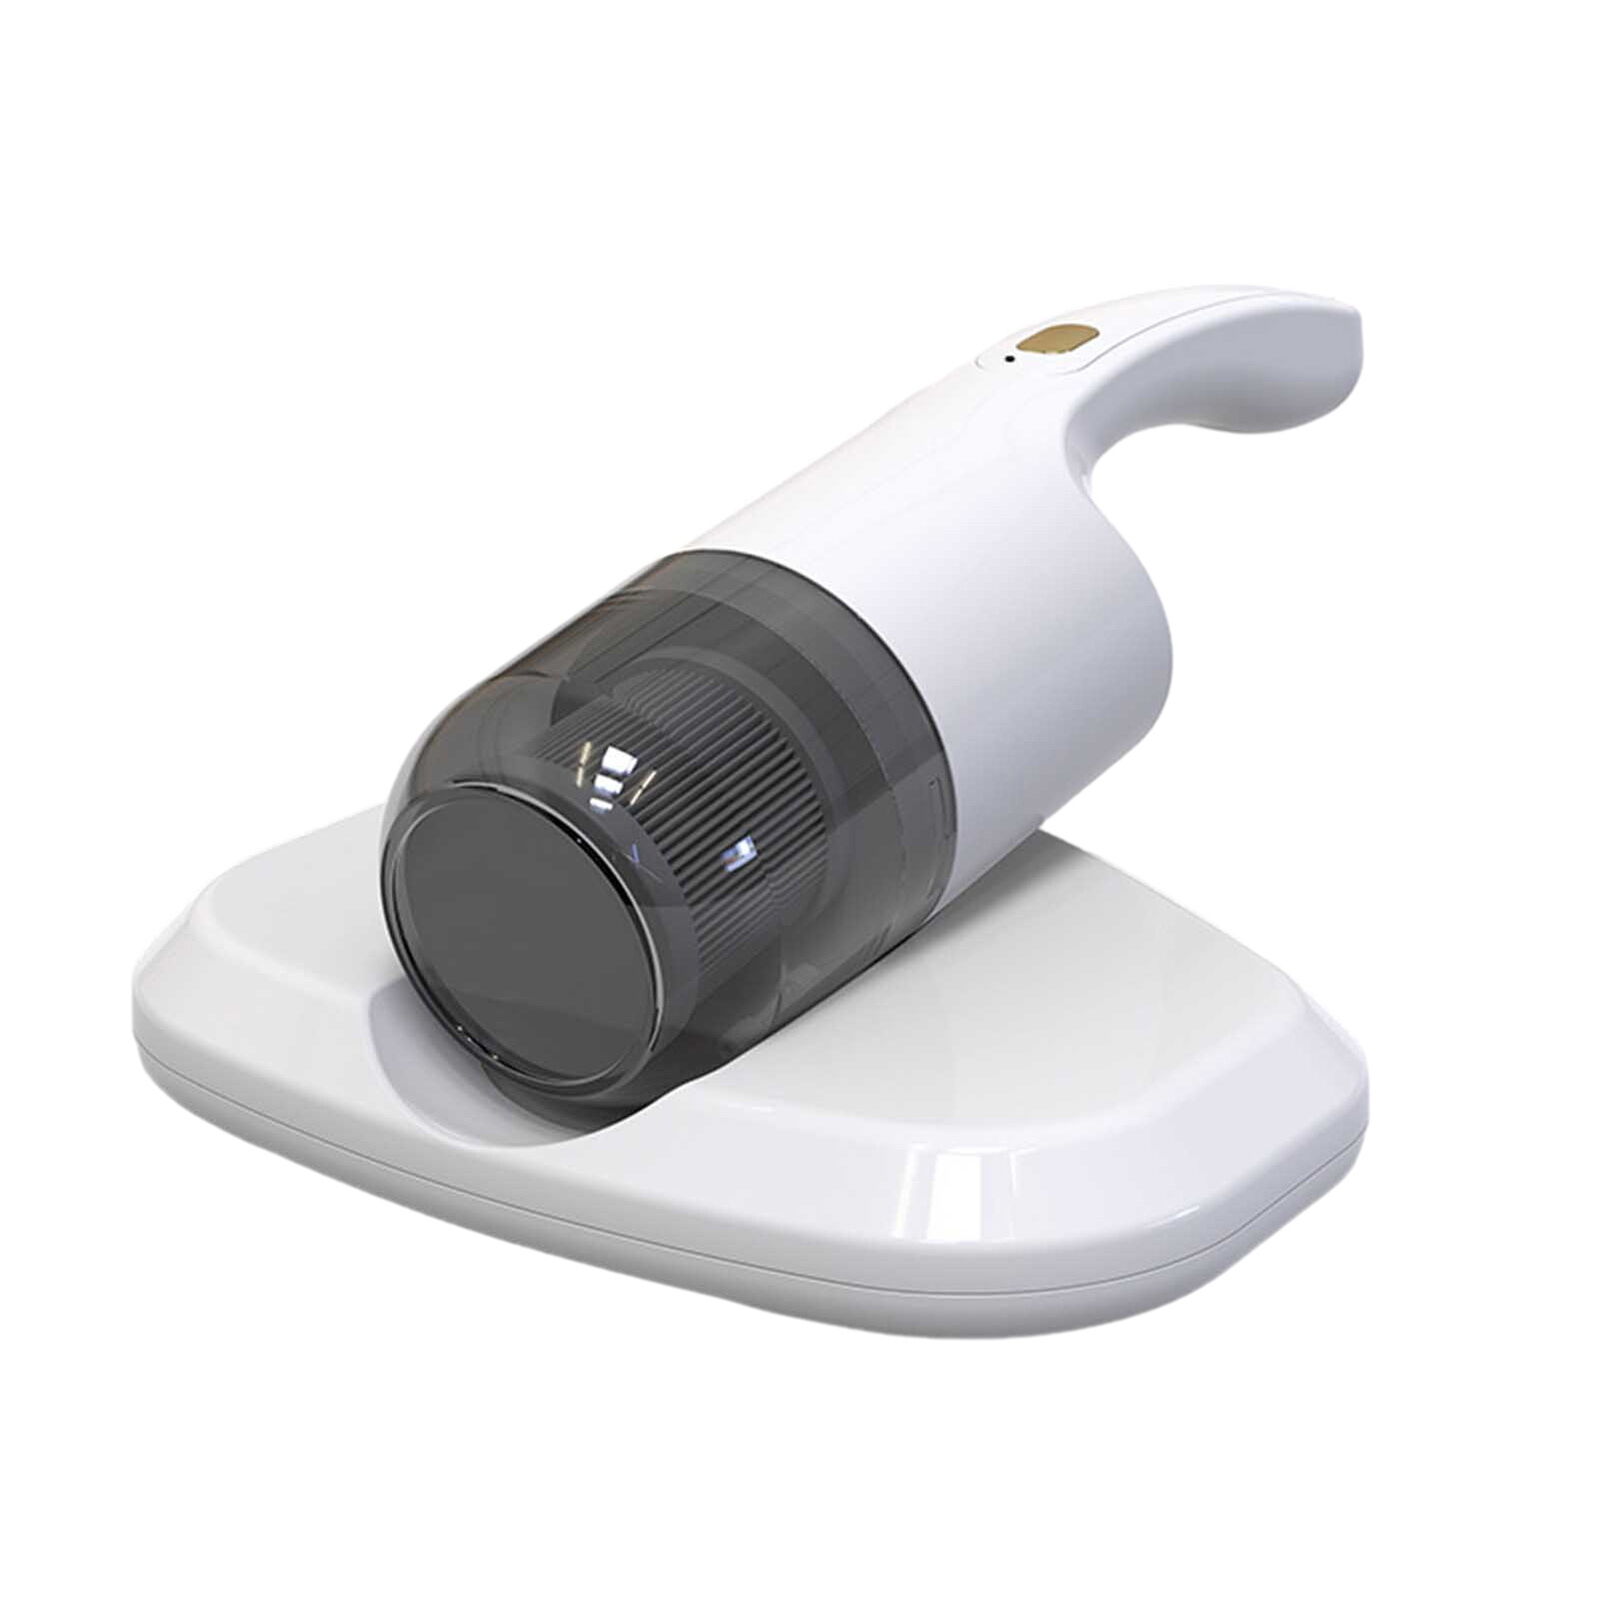 High-efficiency Handheld Vacuum Cleaner Portable with Powerful Suction for Car